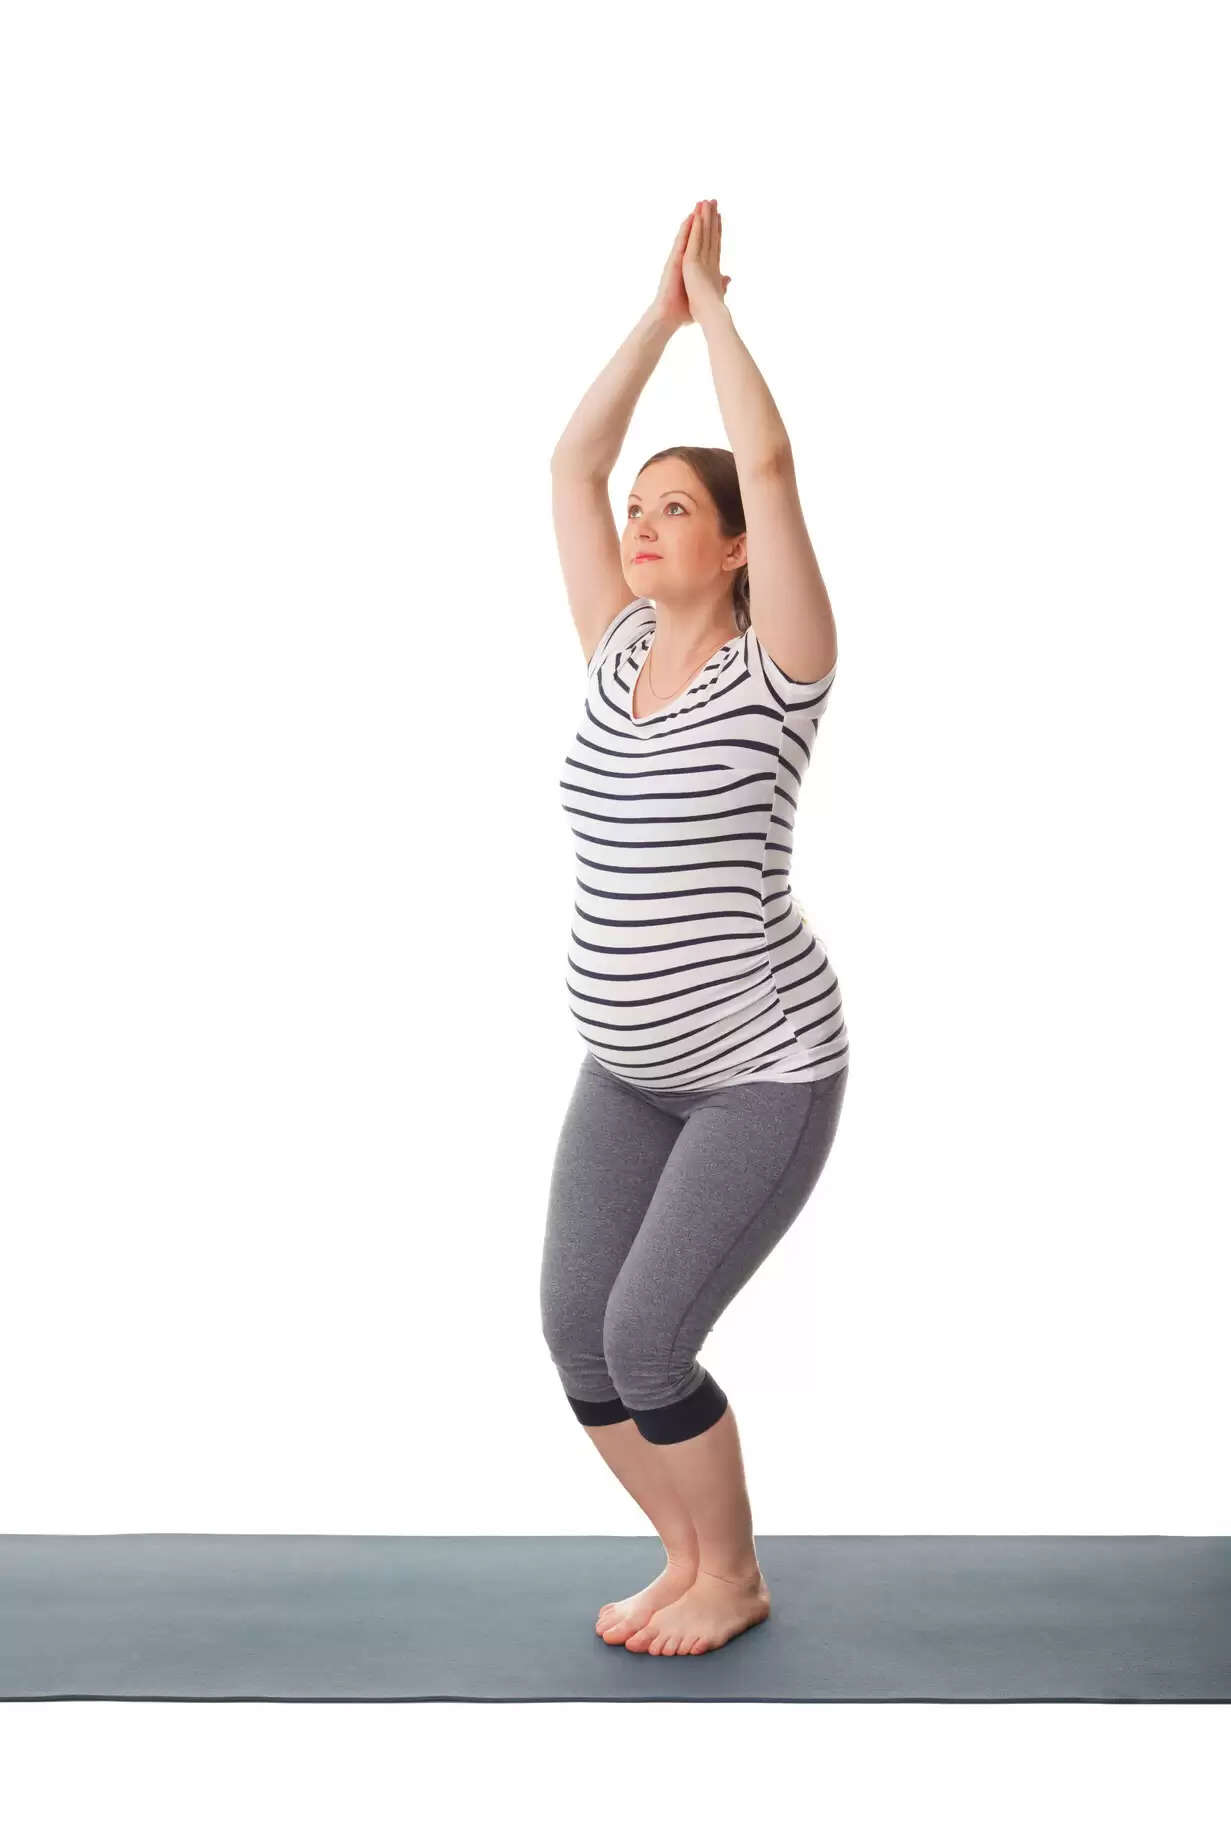 Exercise during pregnancy: Importance, benefits, tips, and more